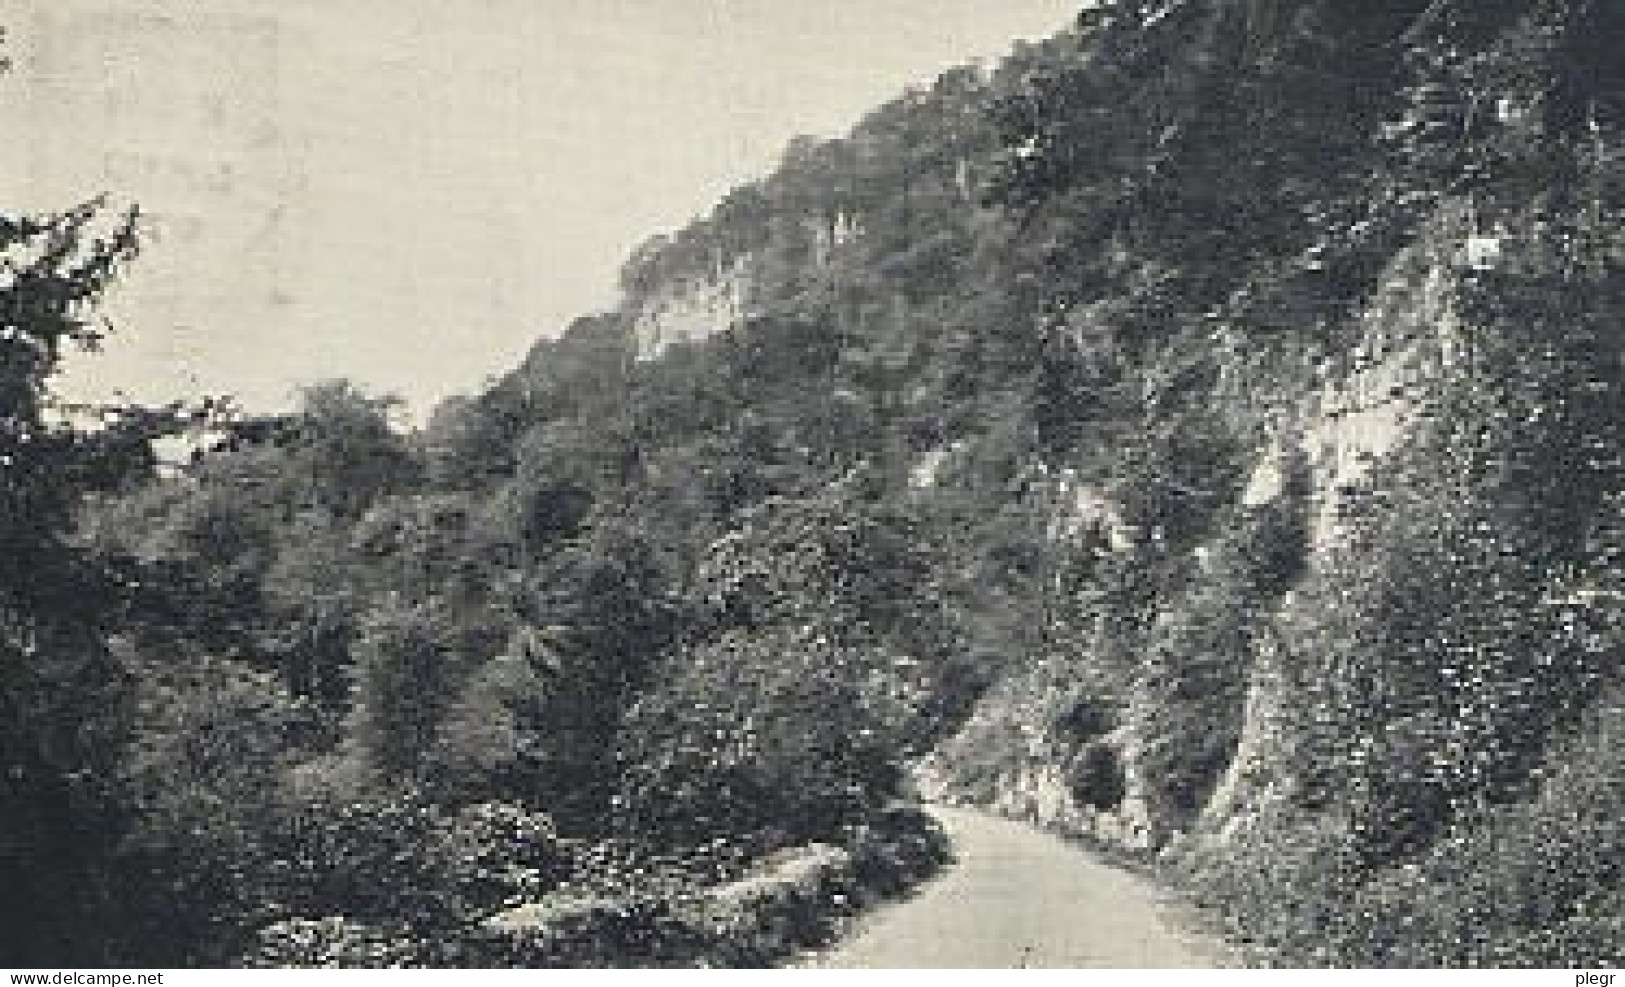 0-GBR05 01 01 - CHEPSTOW - THE WYNDCLIFF FROM TINTERN ROAD - Monmouthshire